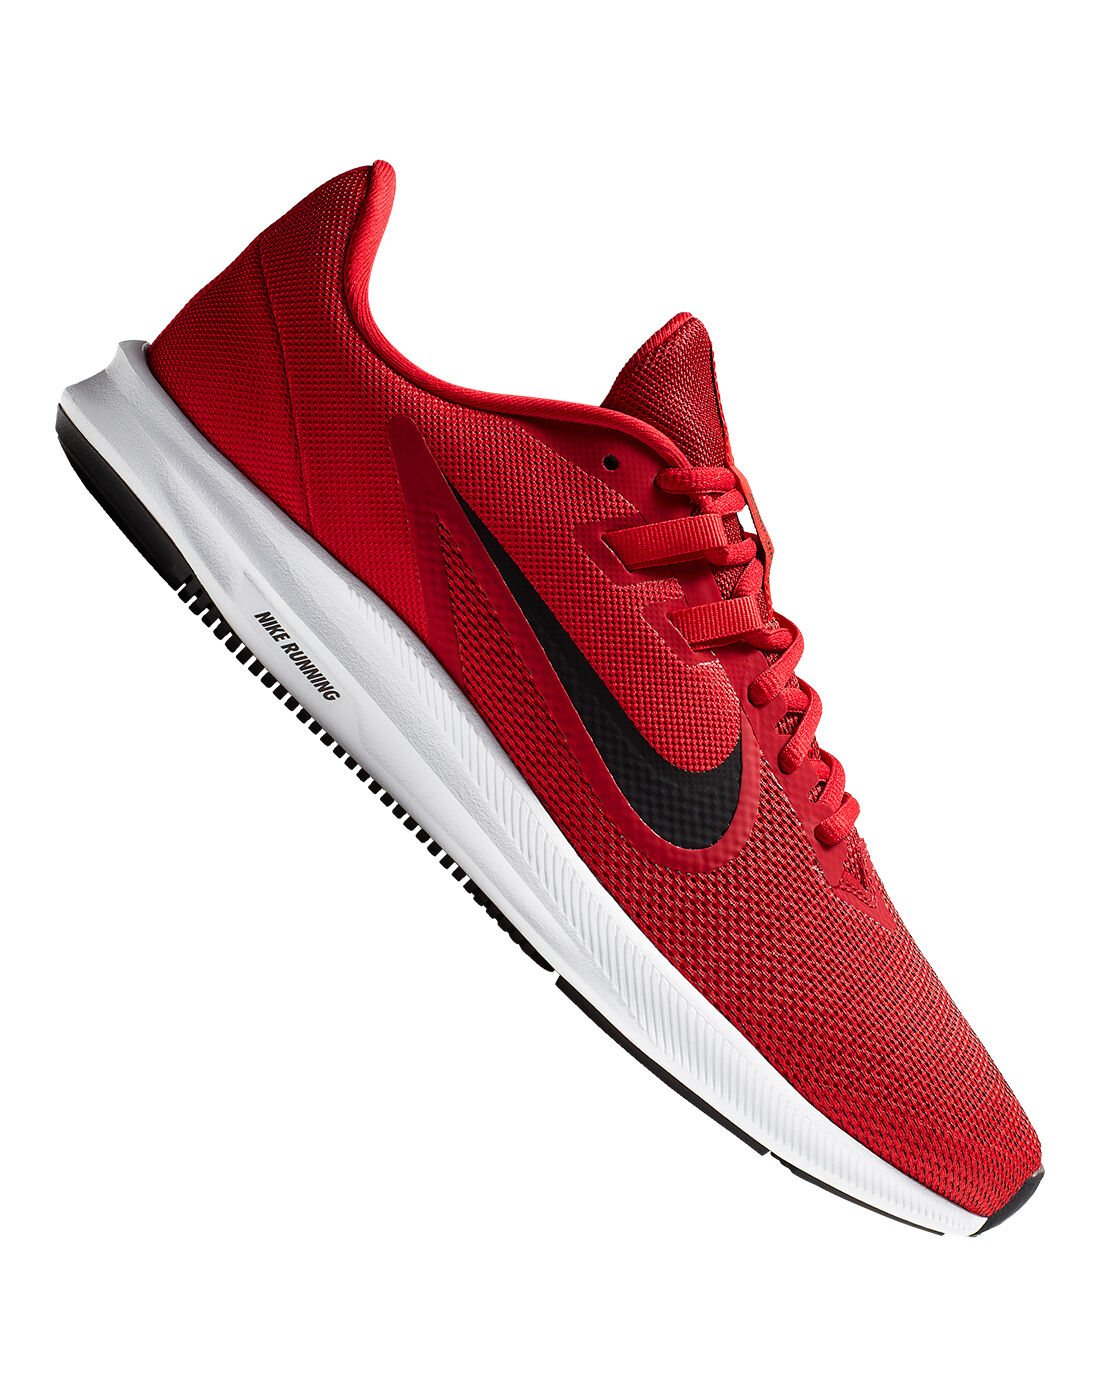 Men's Red Nike Downshifter Trainers 